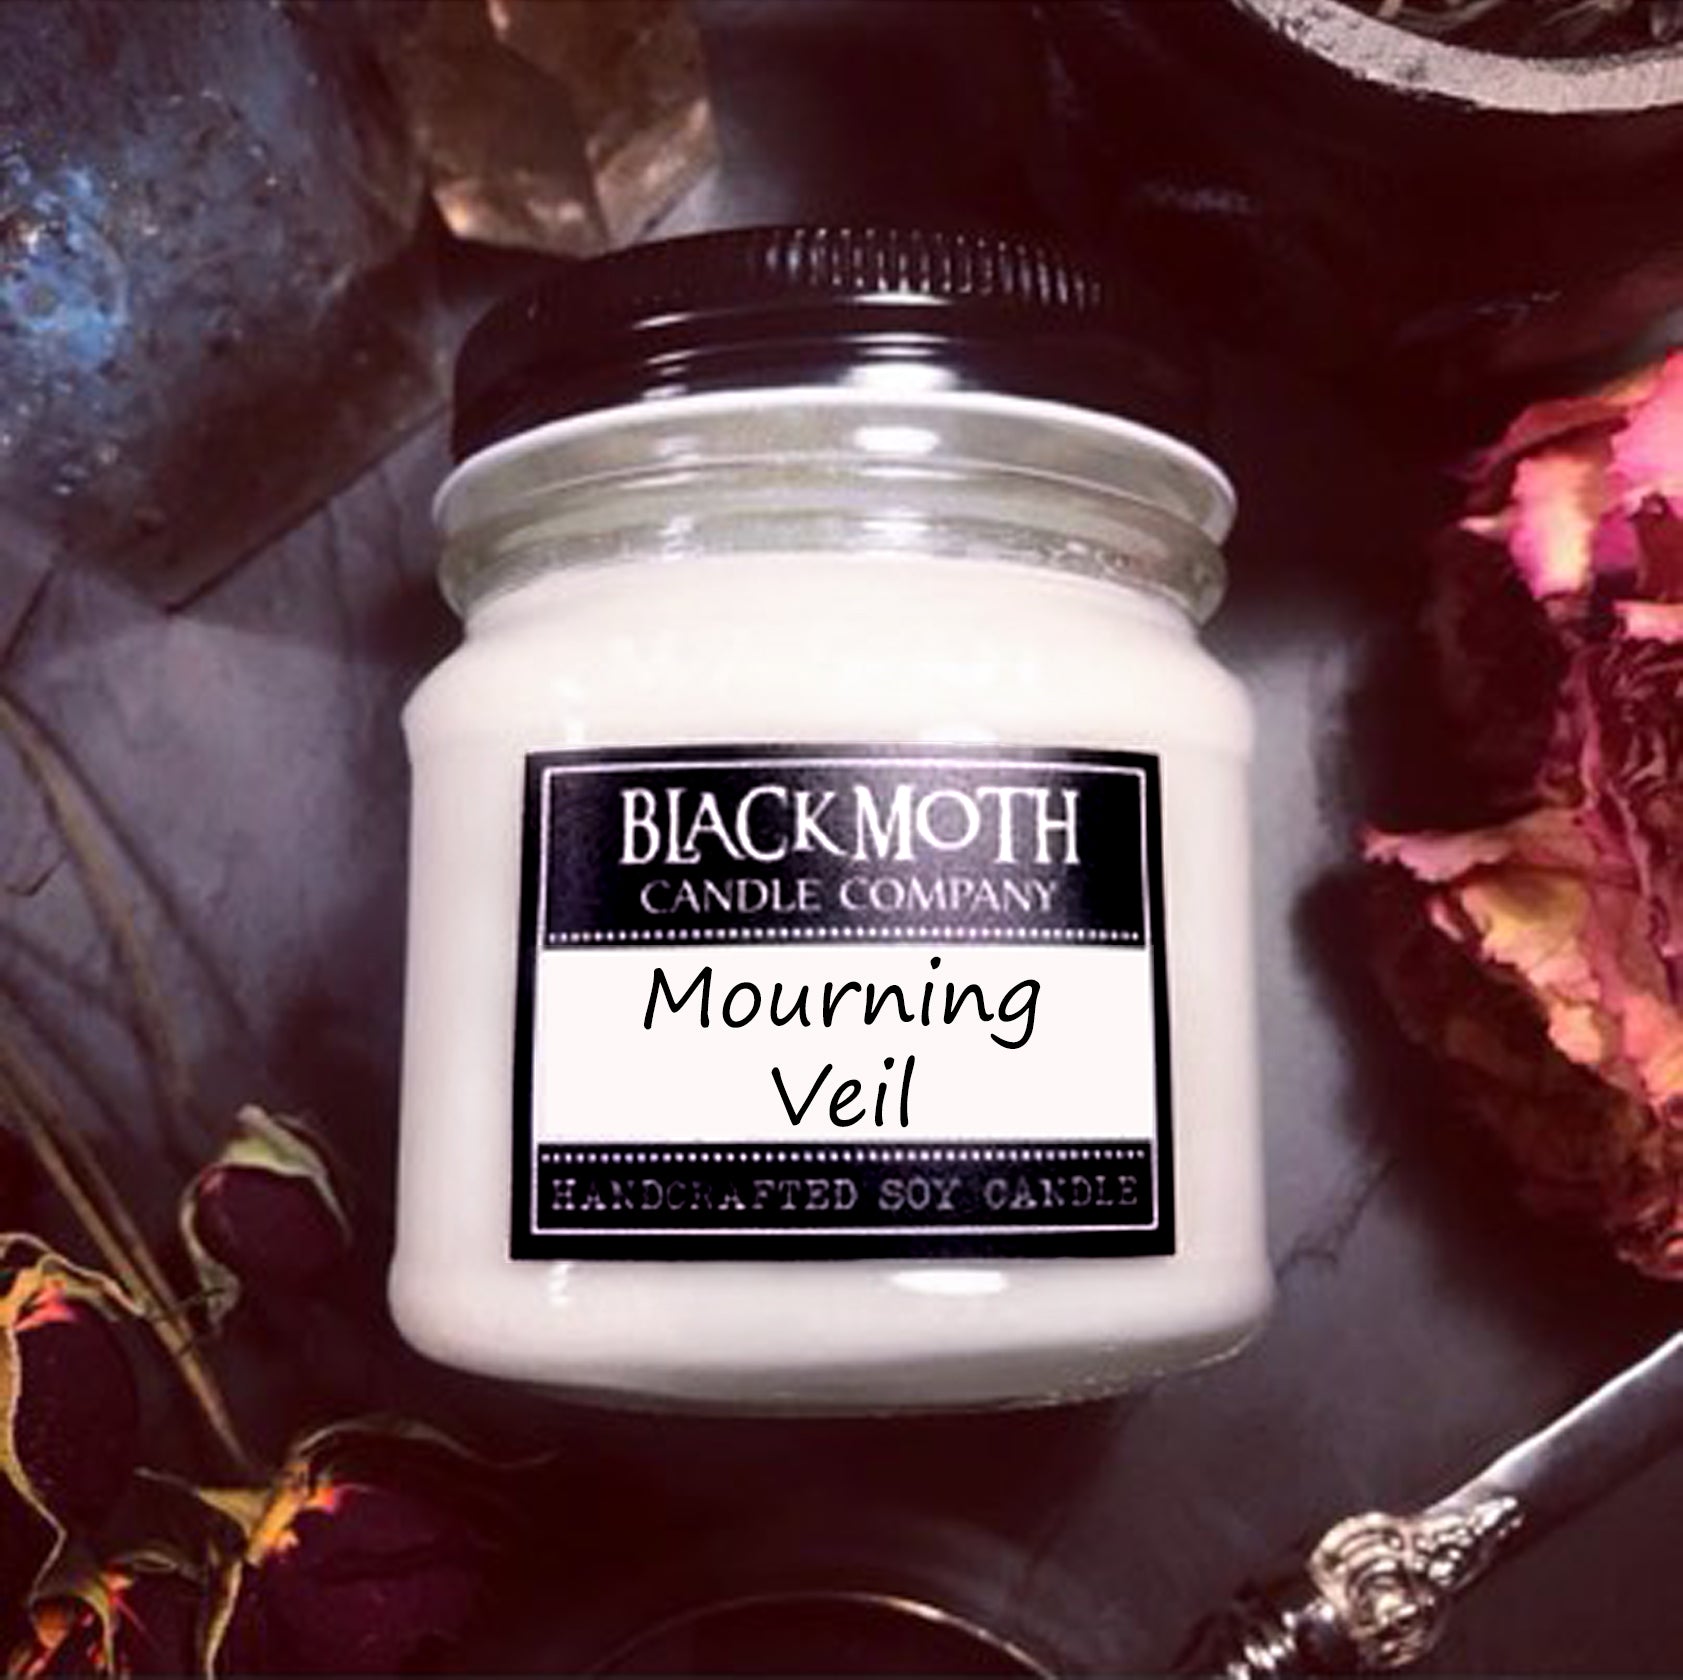 8 oz Mourning Veil Scented Soy Candle in Mason Jar